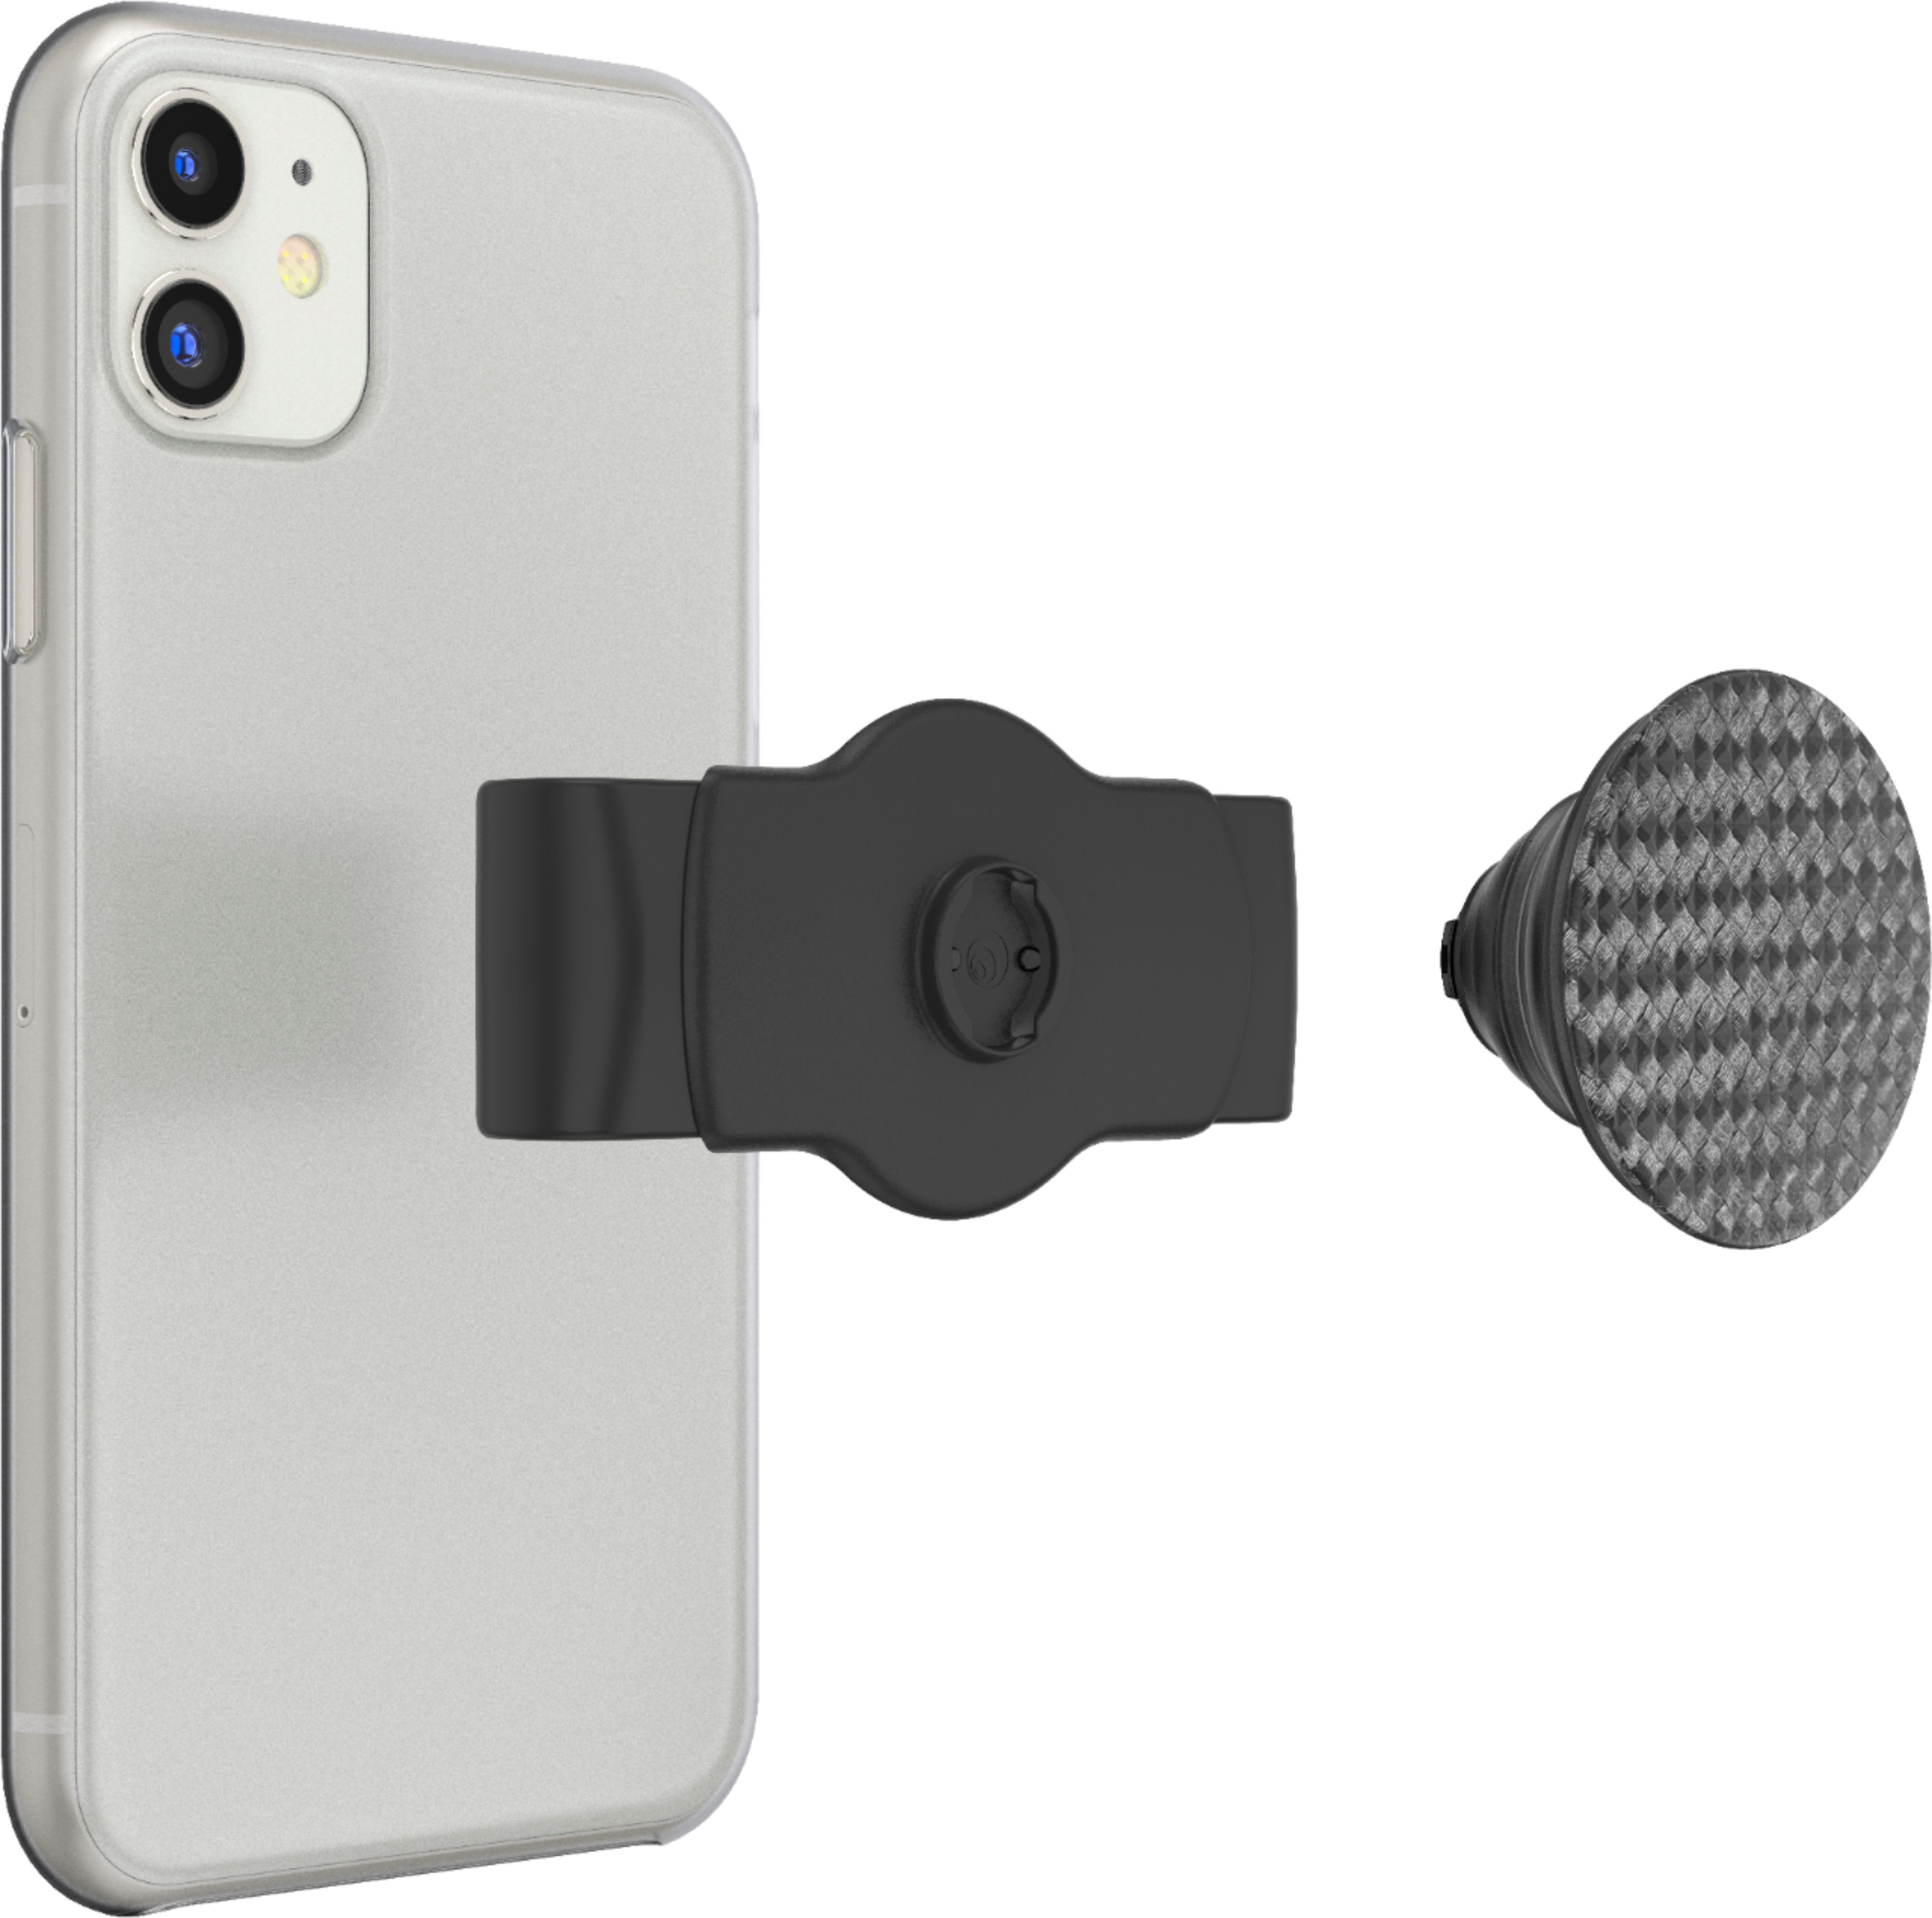 How to properly position PopSockets on your phone